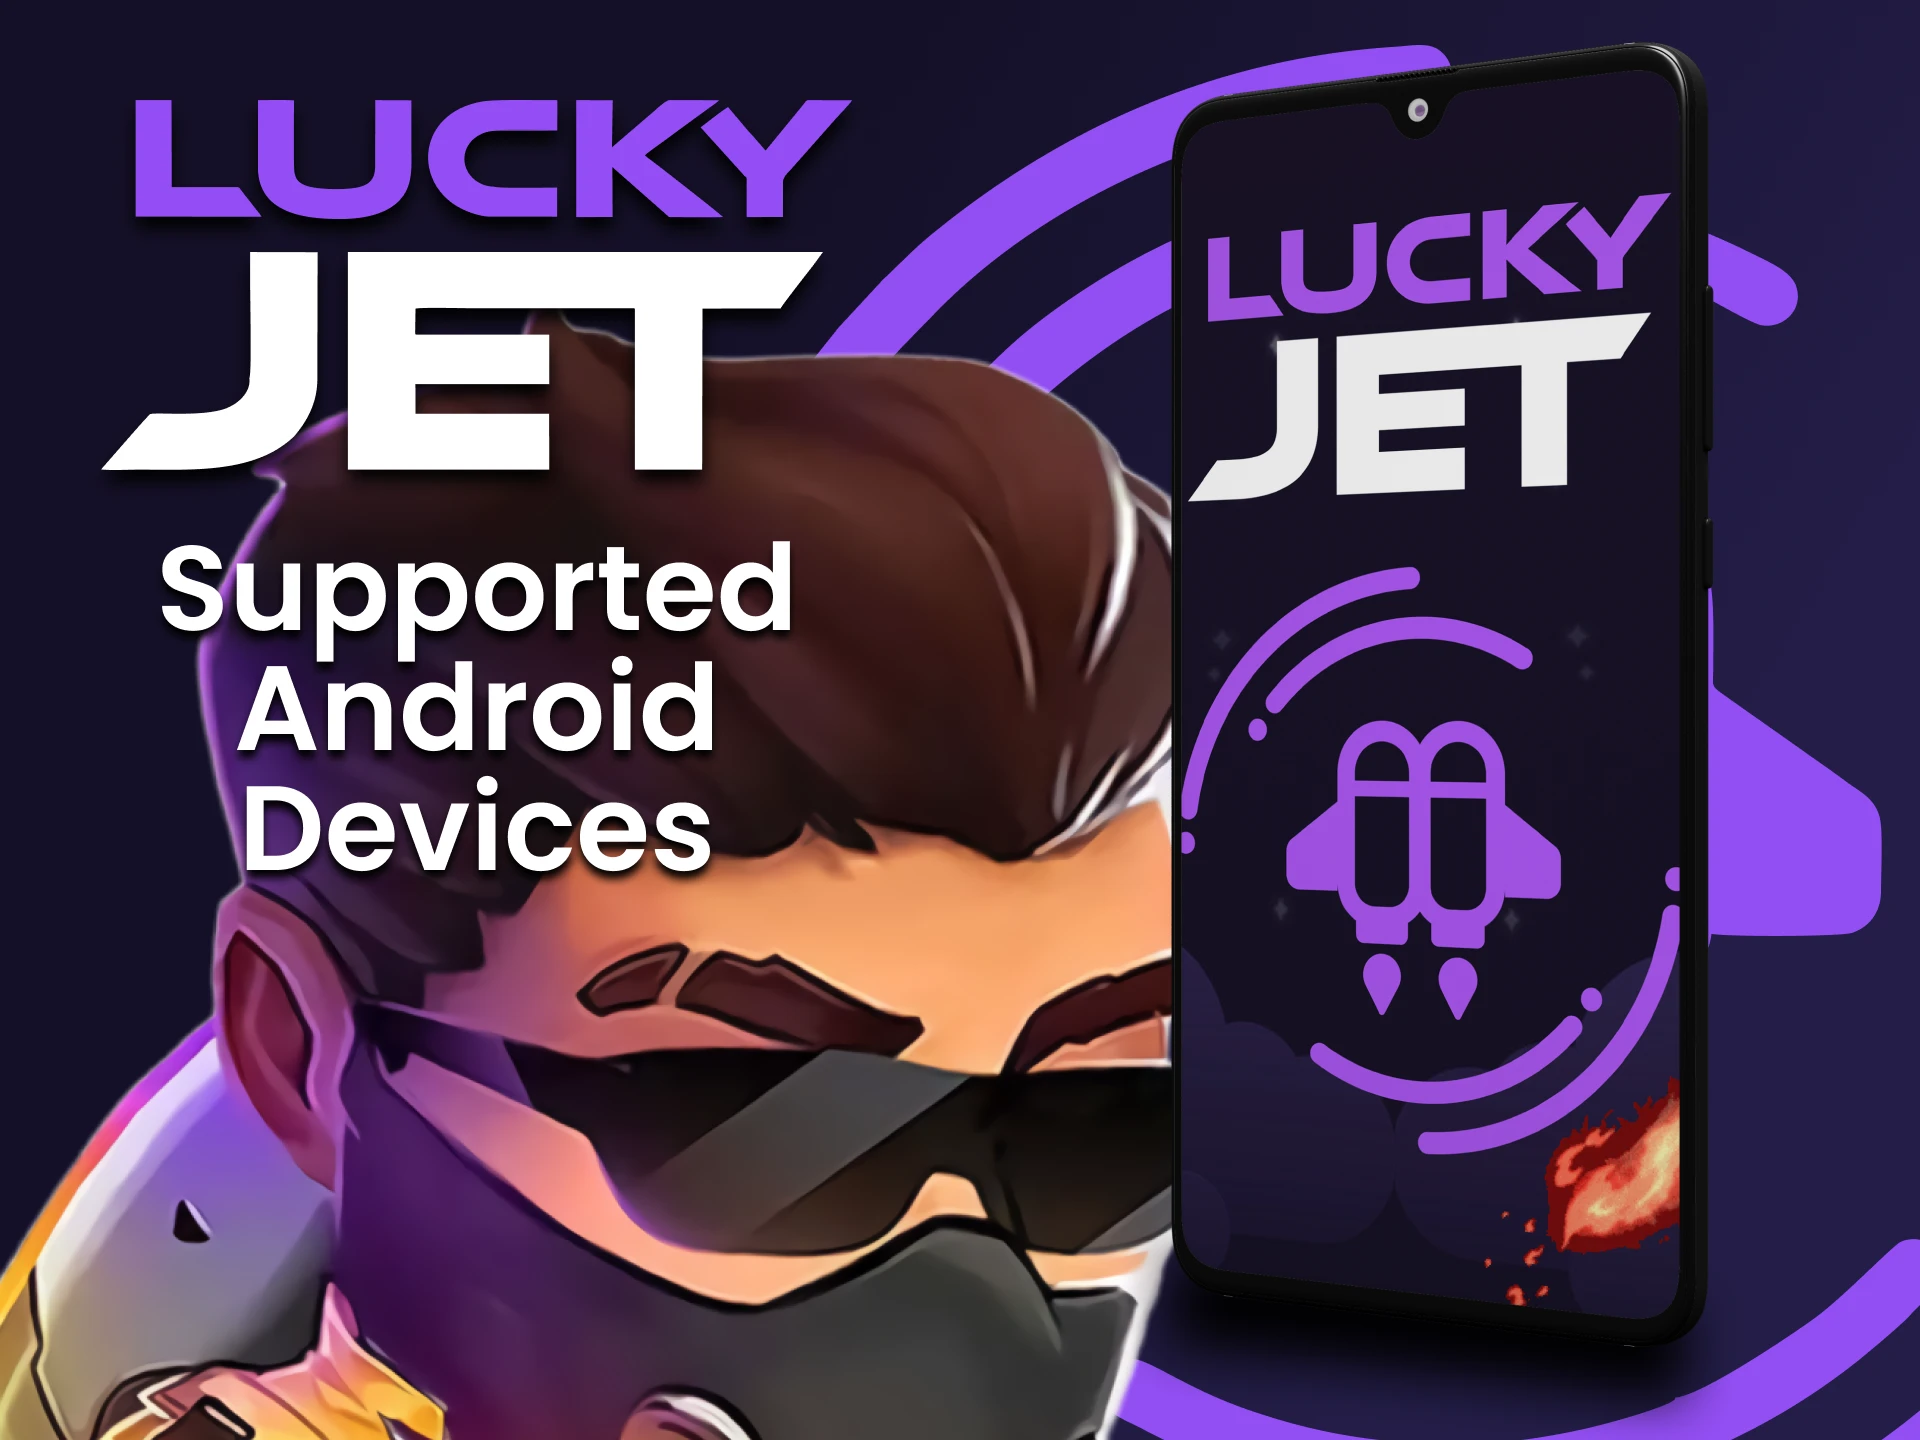 Play Lucky Jet on your Android device.